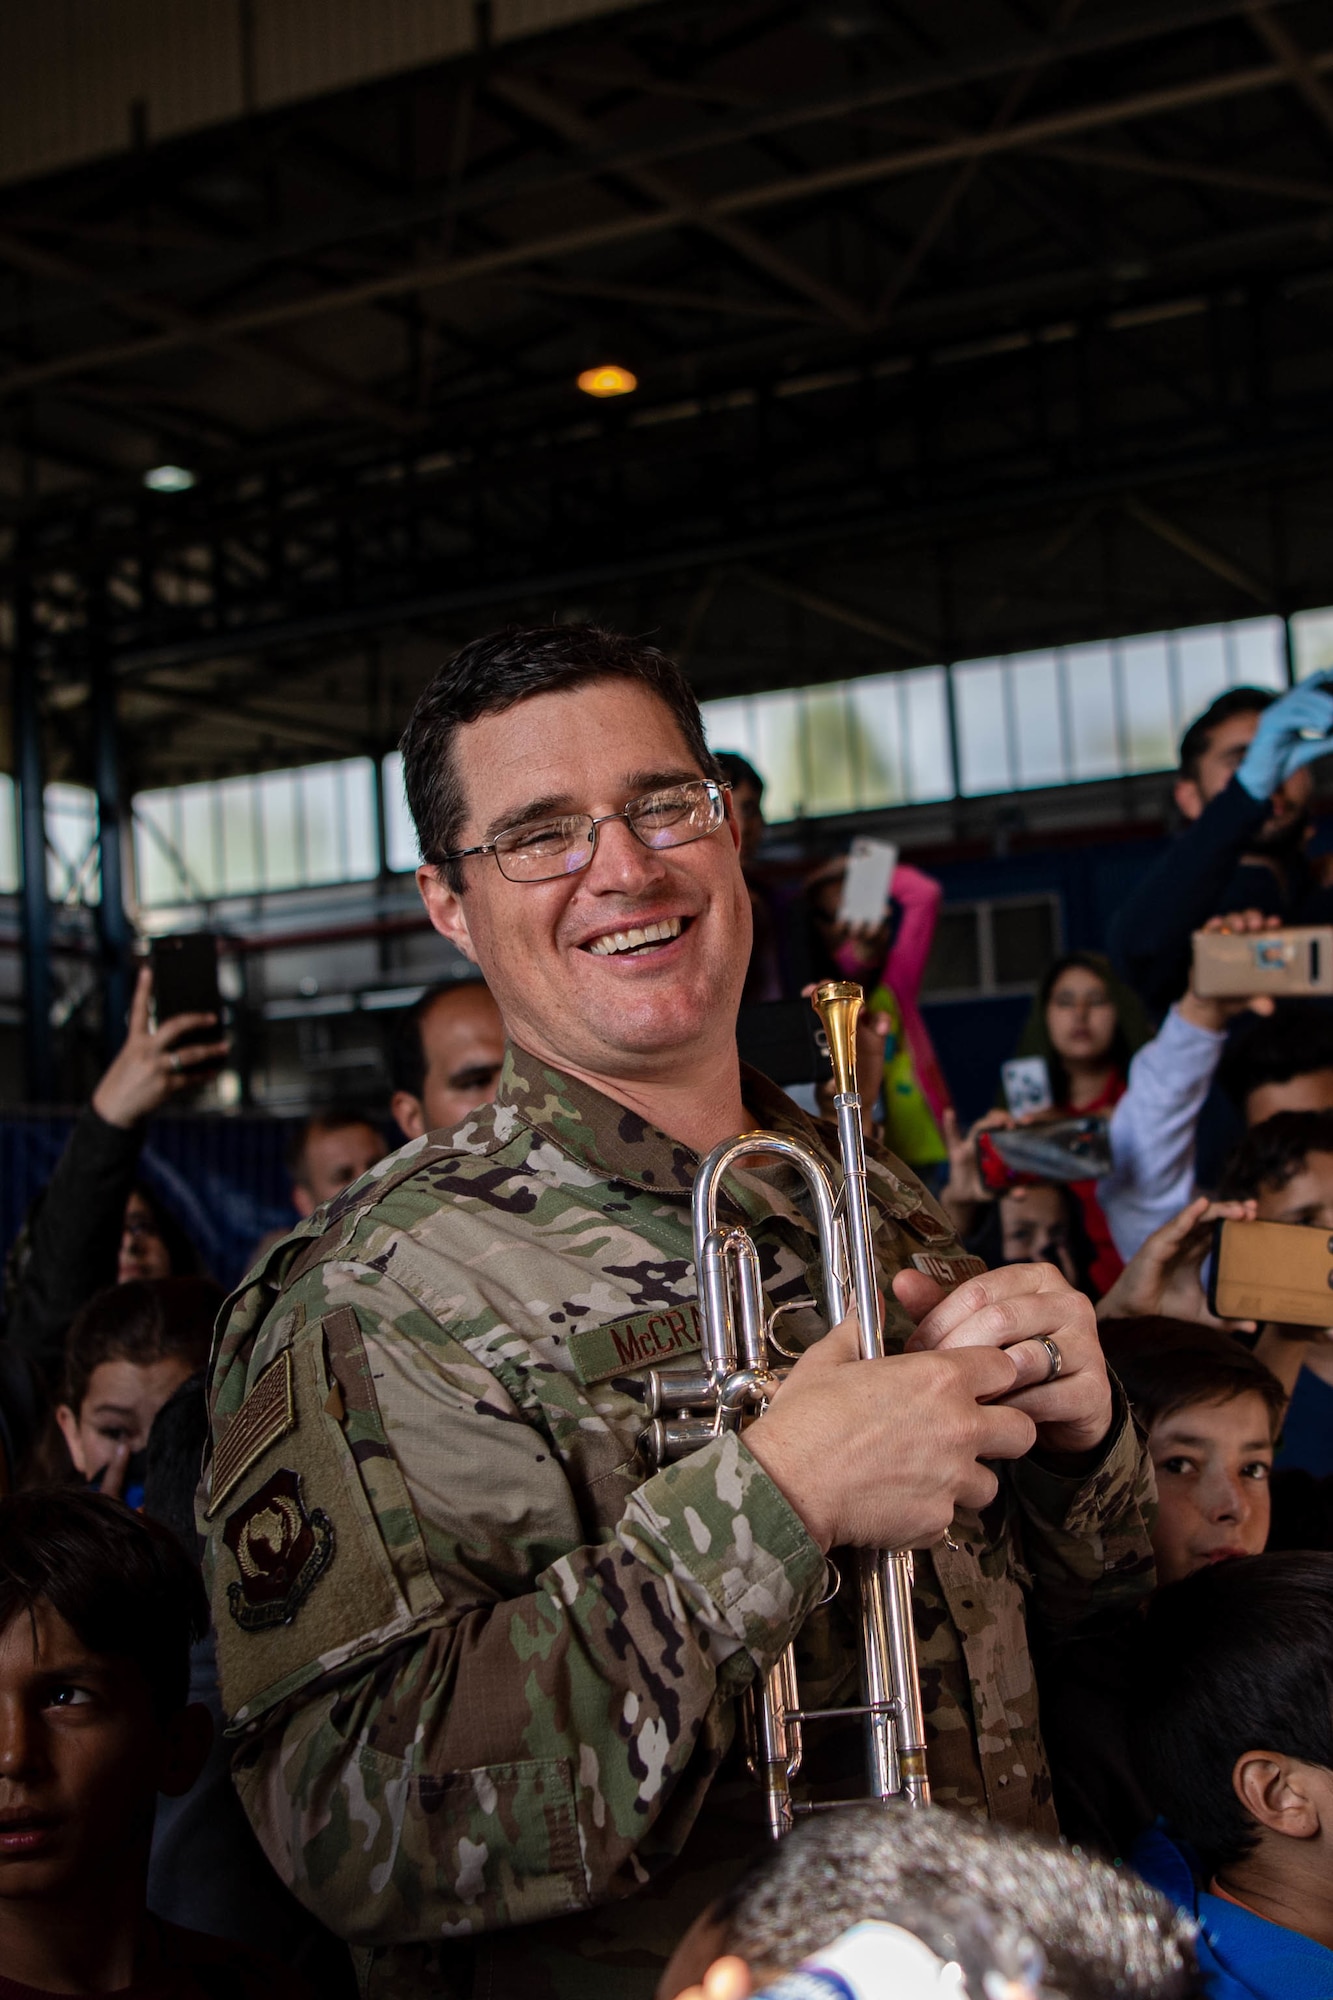 Airman smiles in a crowed while holding a trumpet